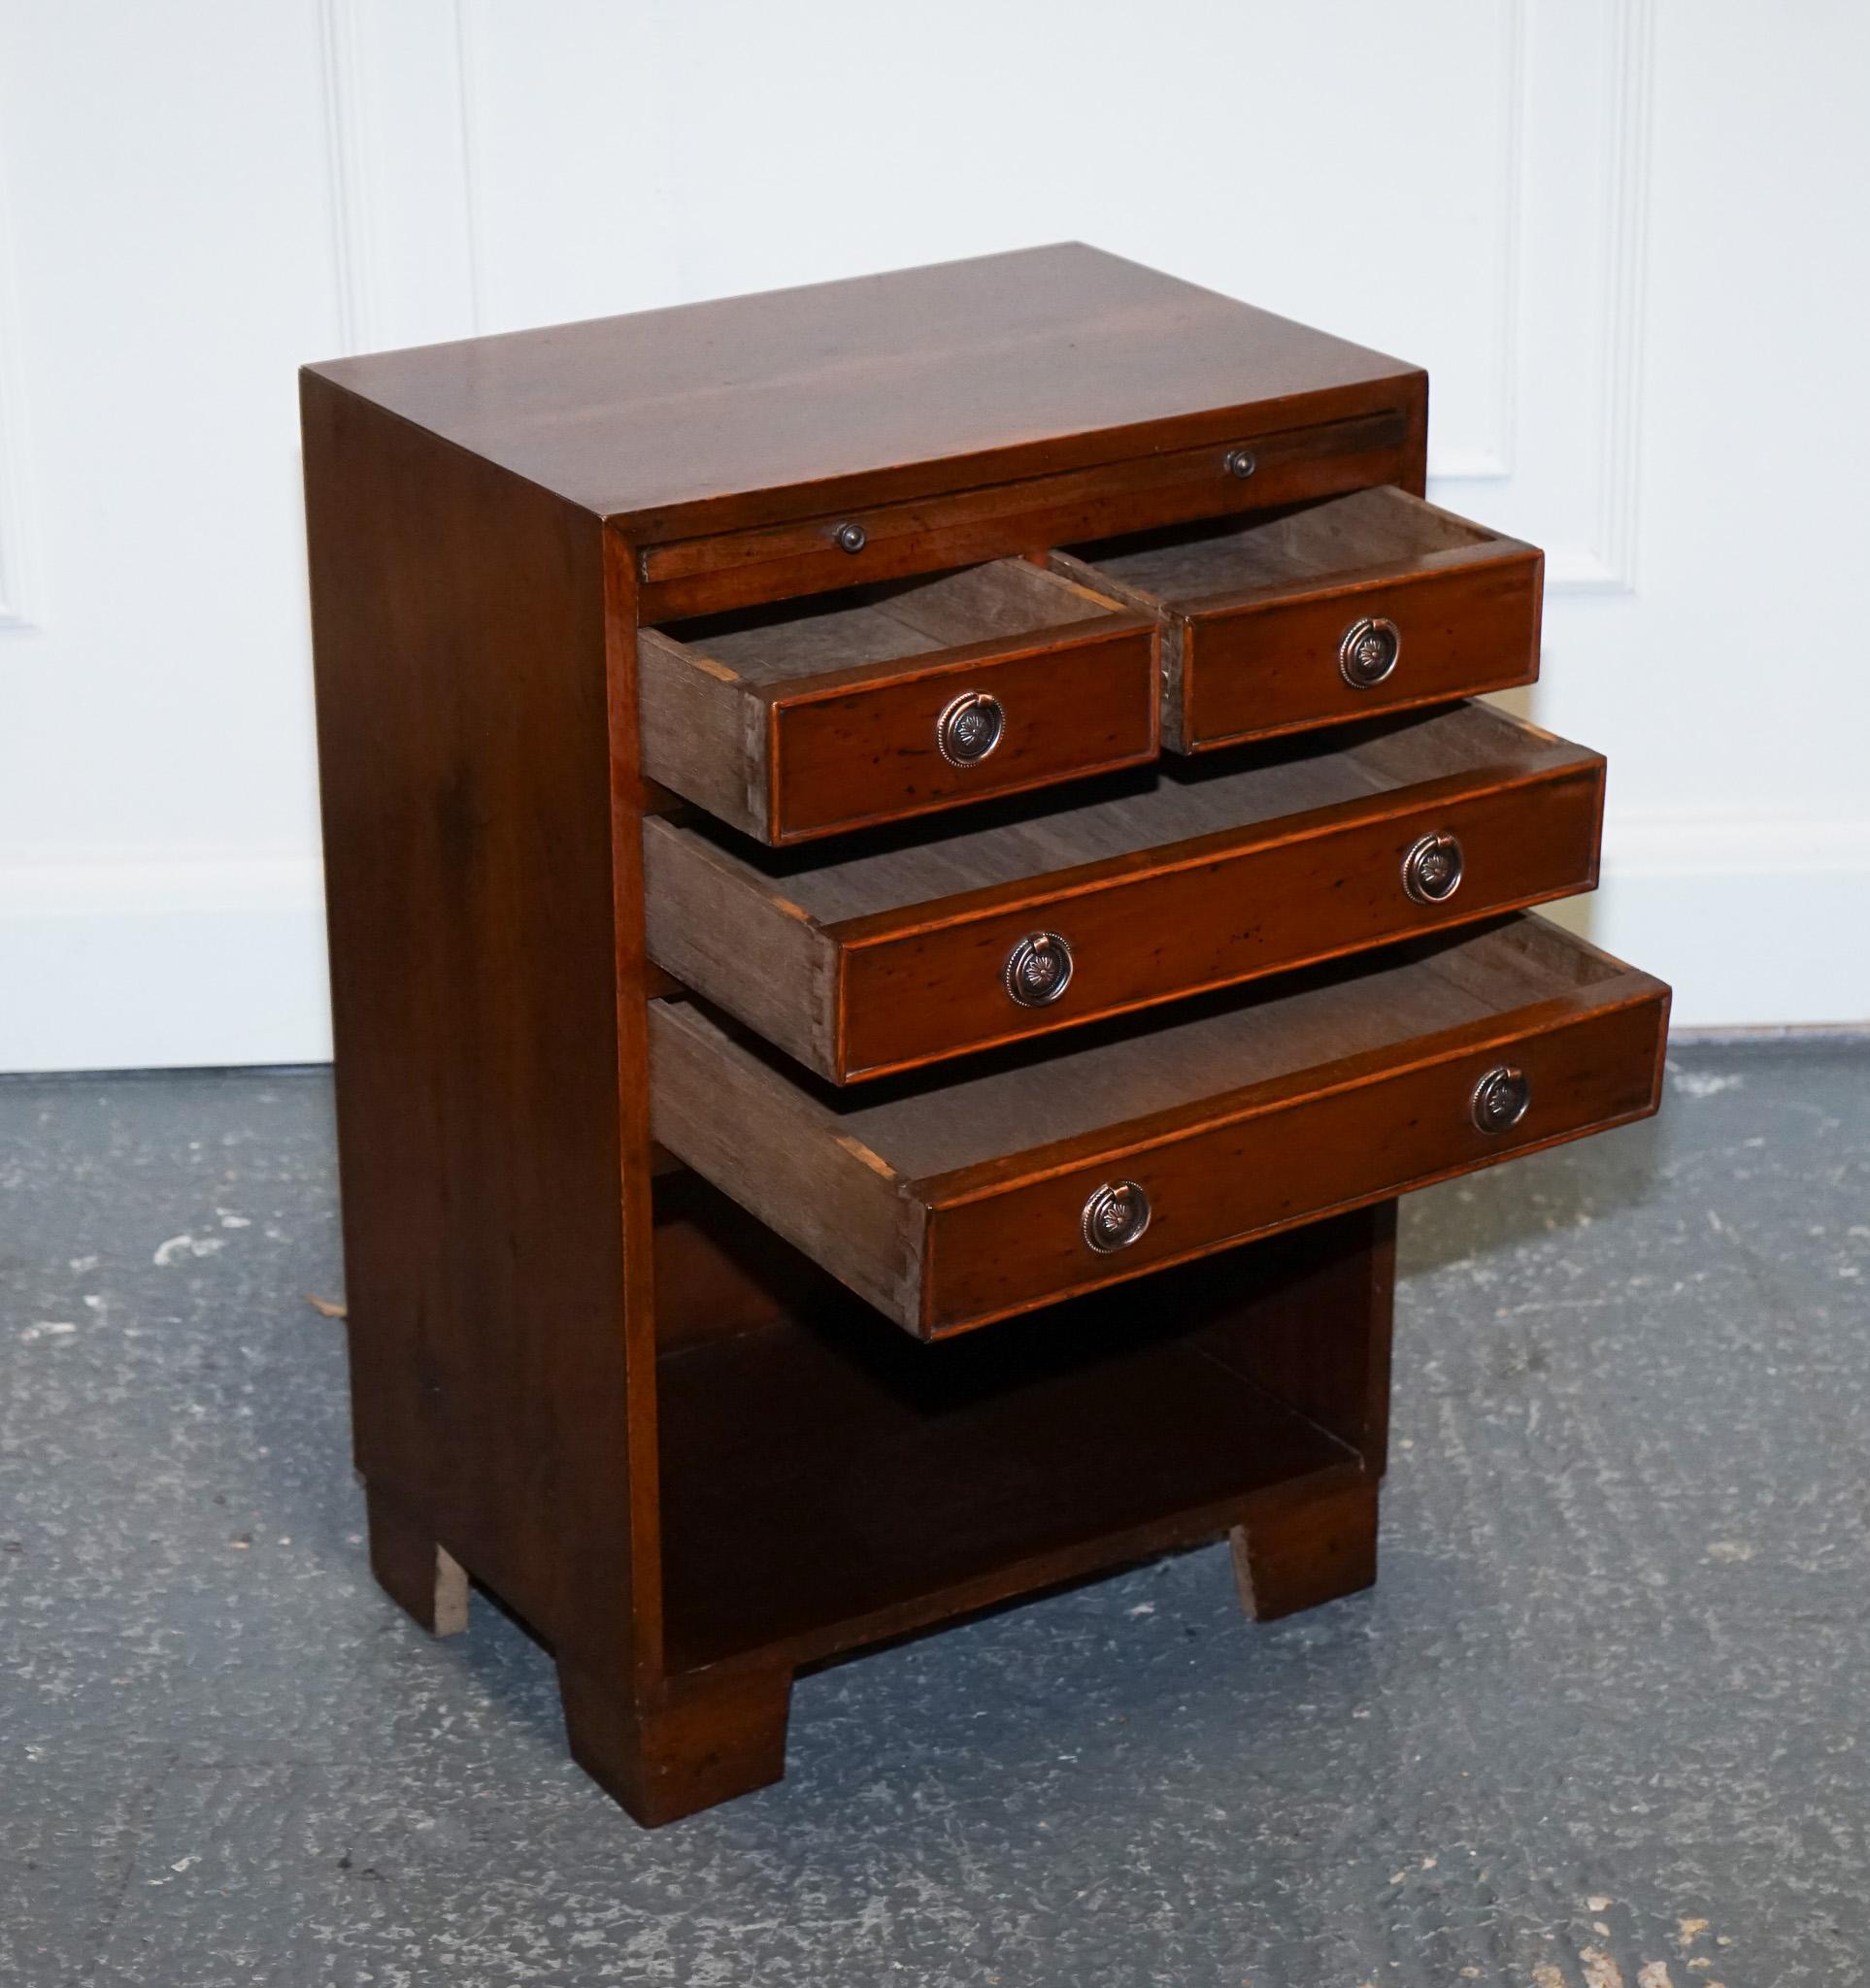 GORGEOUS PAIR OF HARDWOOD GEORGIAN STYLE NIGHTSTANDS WiTH DRAWERS 2